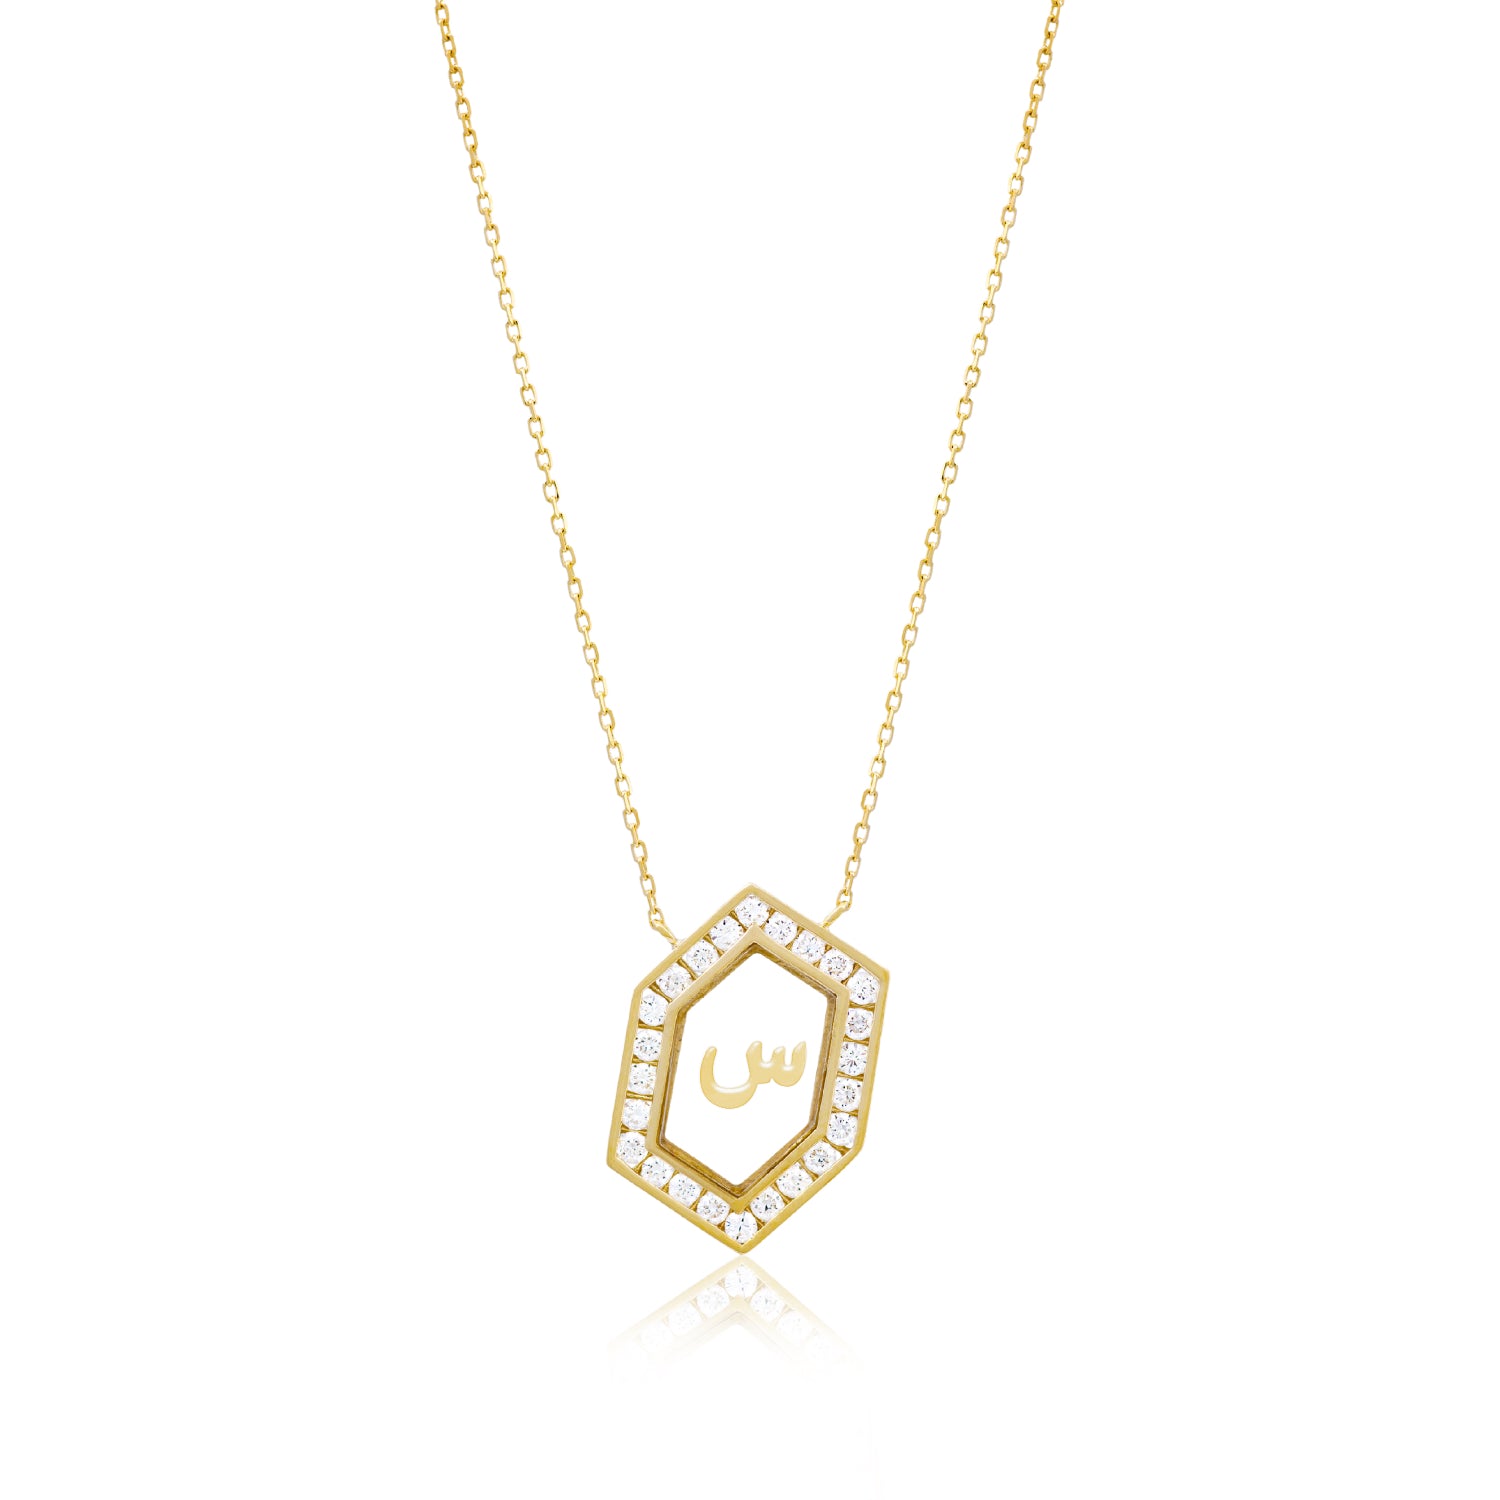 Qamoos 1.0 Letter س Diamond Necklace in Yellow Gold